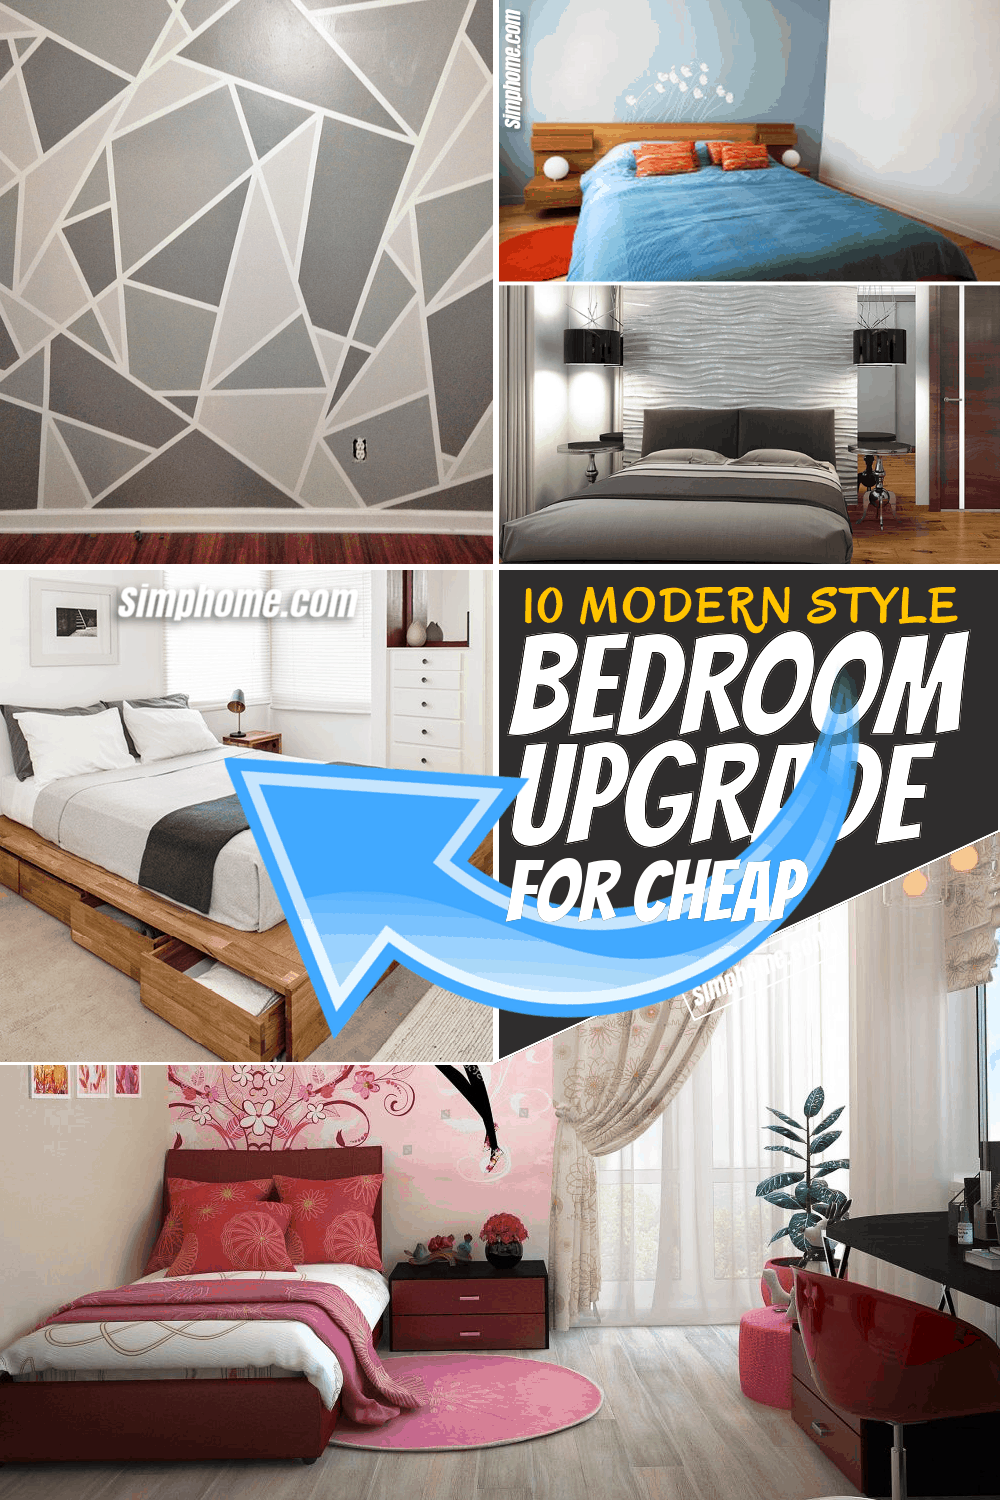 SIMPHOME.COM 10 Modern Style Bedroom Upgrade for Cheap Featured Pinterest Image